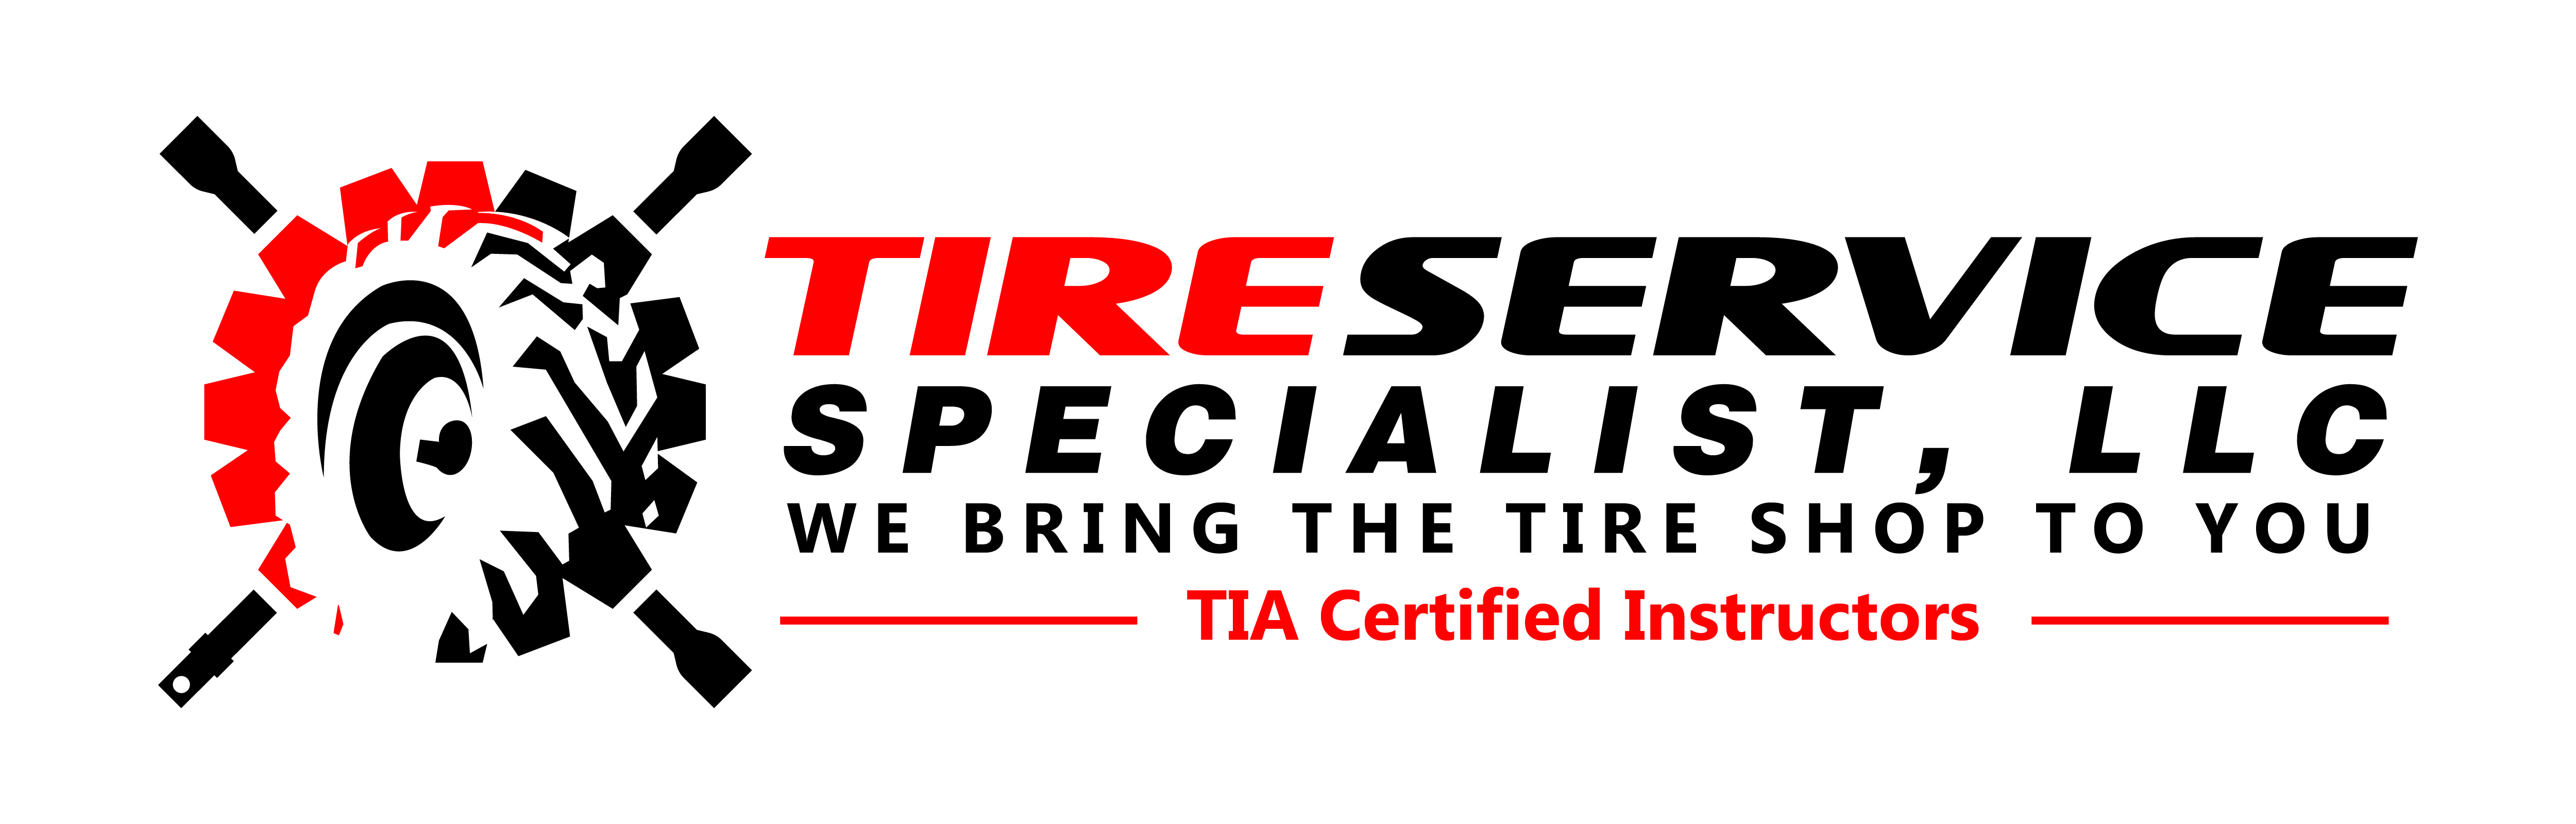 Welcome to Tire Service Specialists